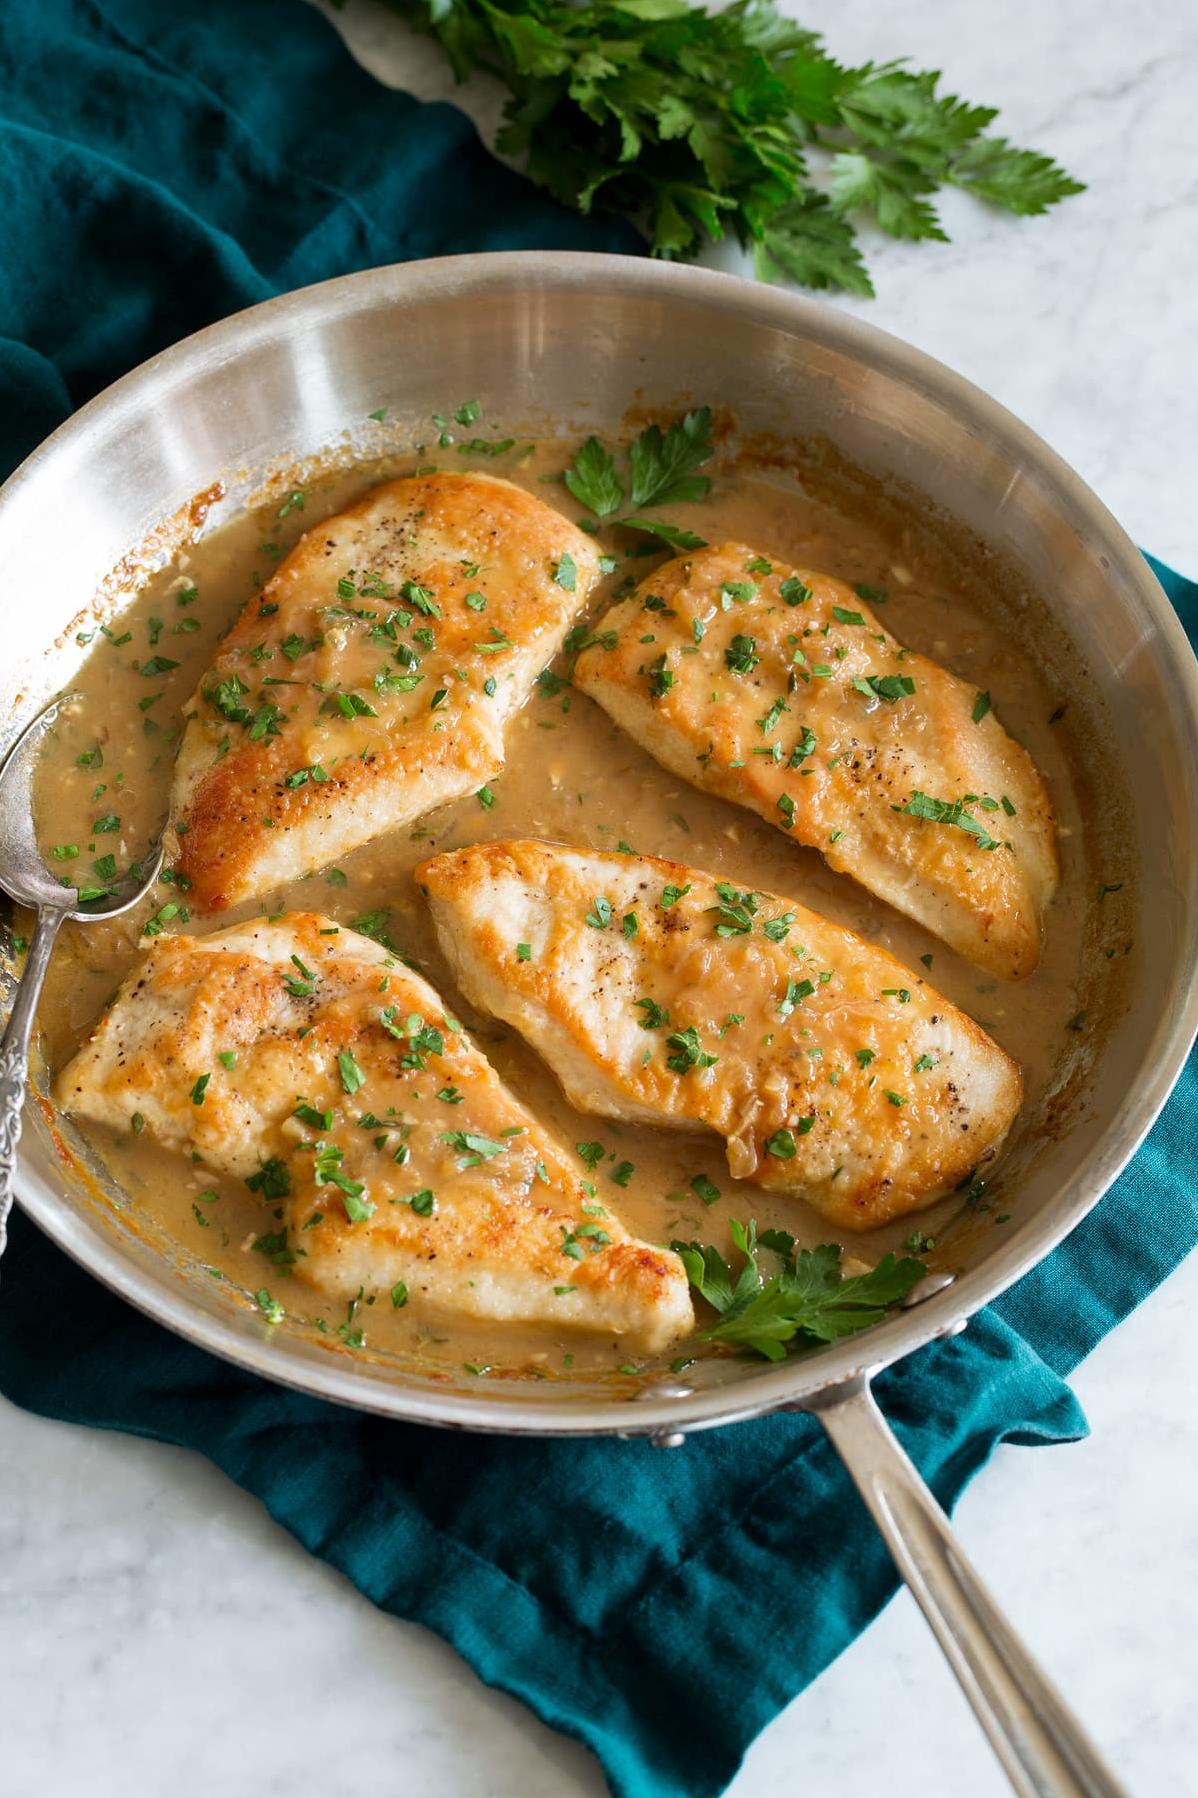  Sizzling golden chicken with fragrant herbs and white wine